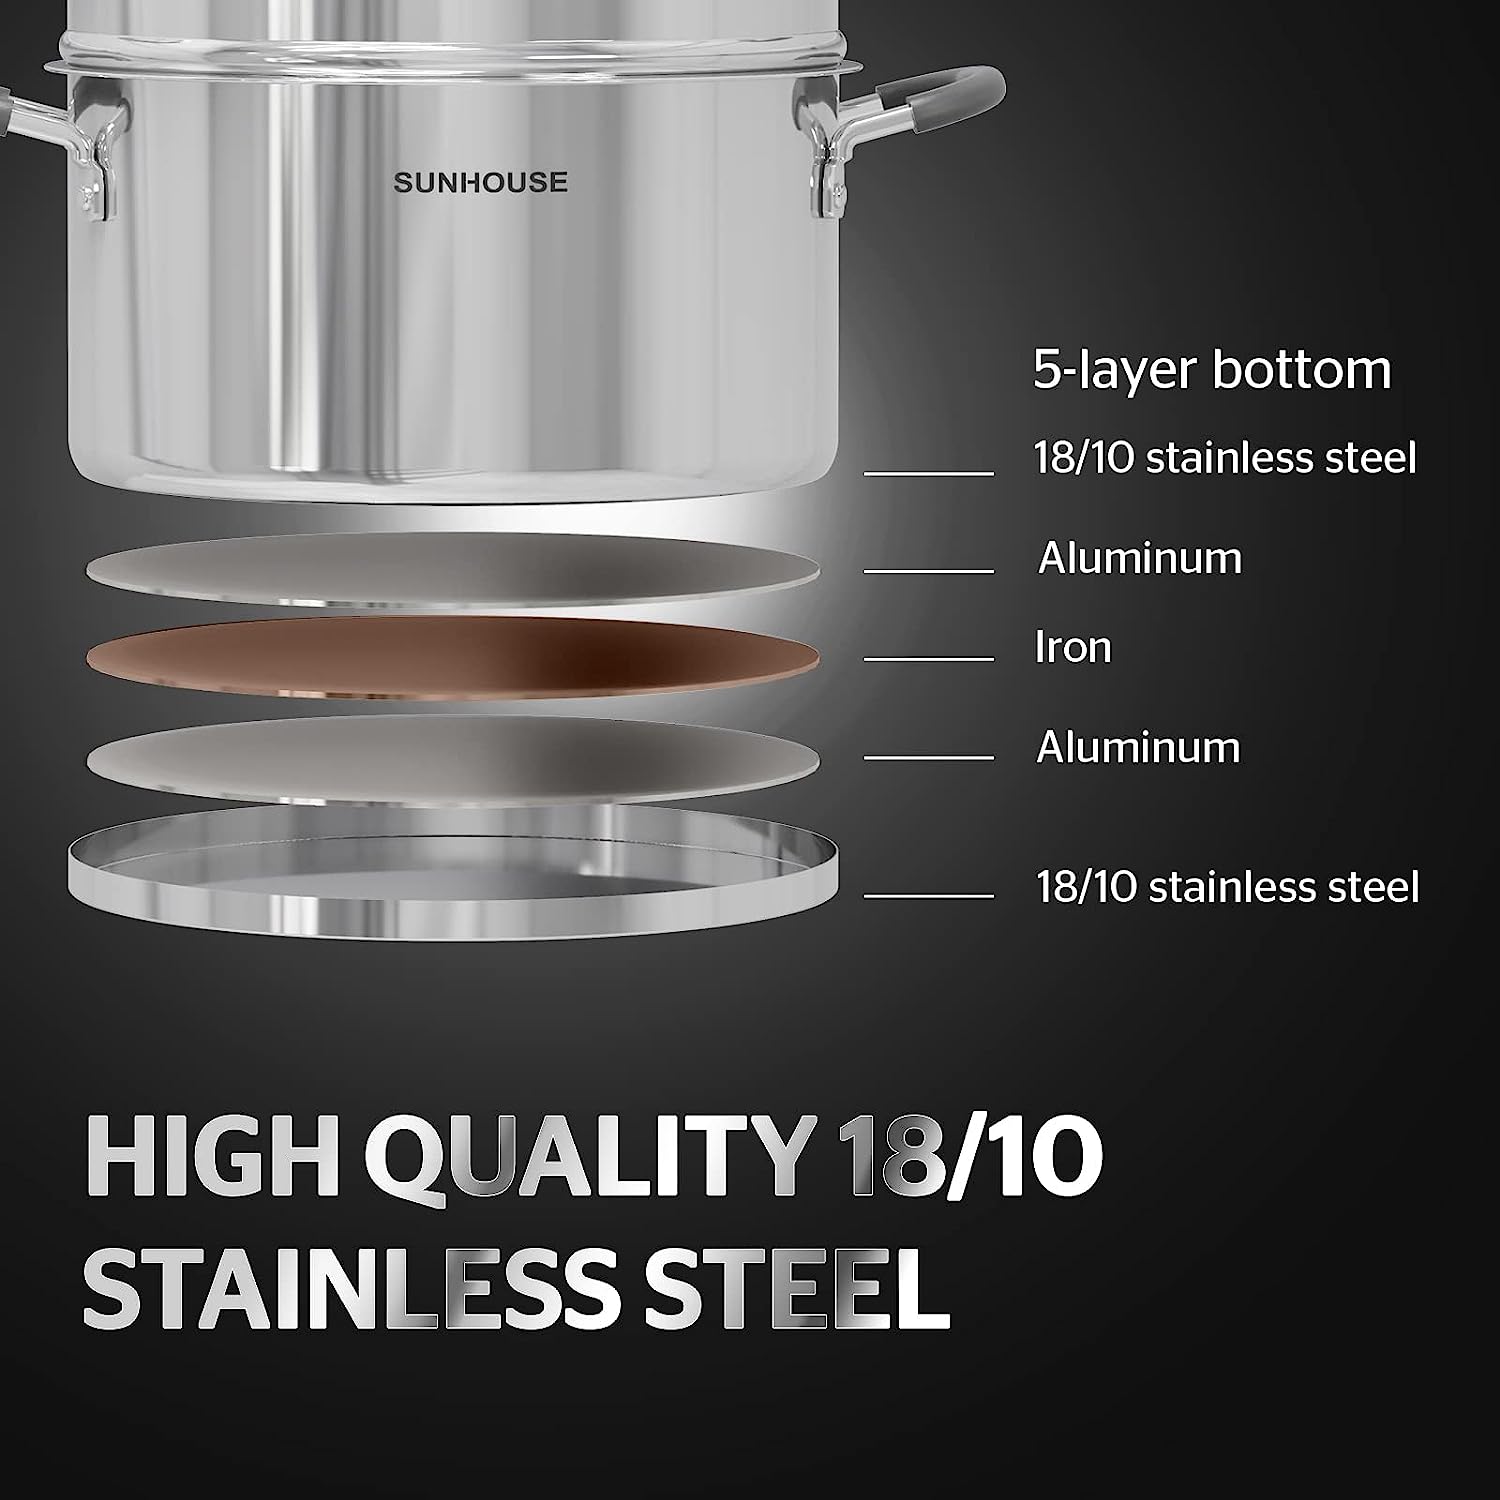 Steamer For Cooking, Stainless Steel Steamer Pot Food Steamer 11 Inch Steam  Pots With Lid 2 Tier Kitcken Cooking Tool For Cooking Vegetables Seafood S